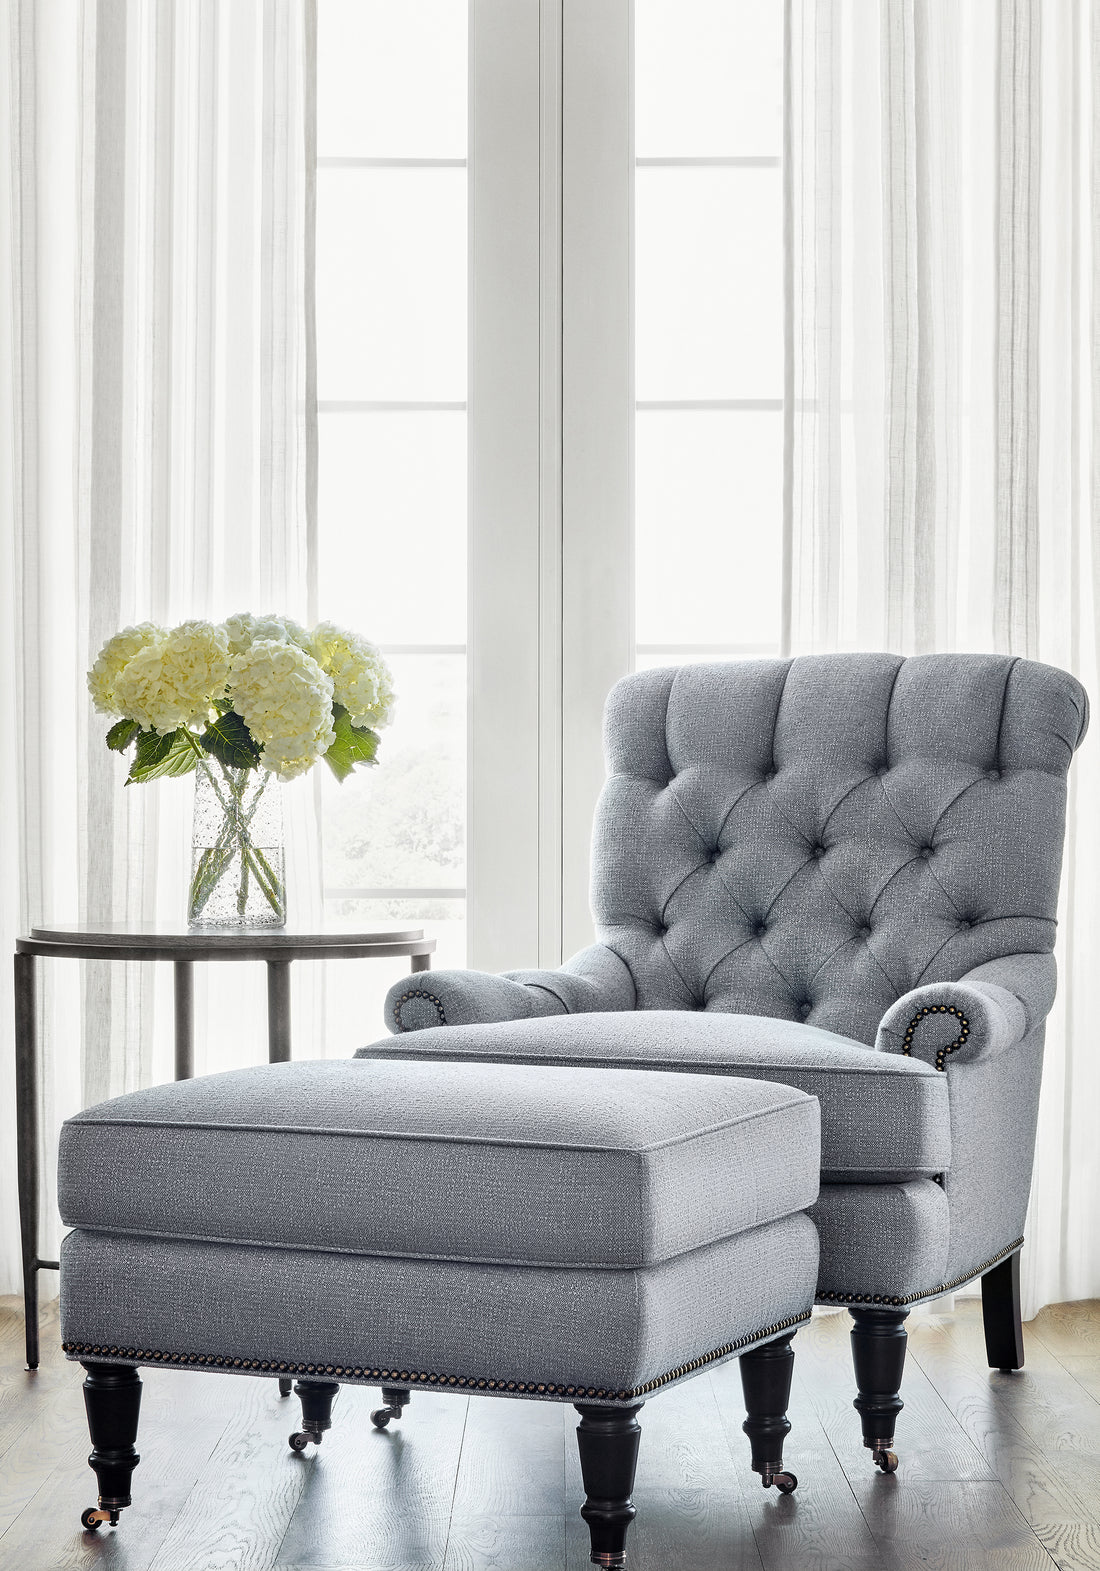 Cambridge Chair and Newbury Ottoman in Thibaut Everly woven fabric in Smoke color - pattern number W74062 - in the Cadence collection